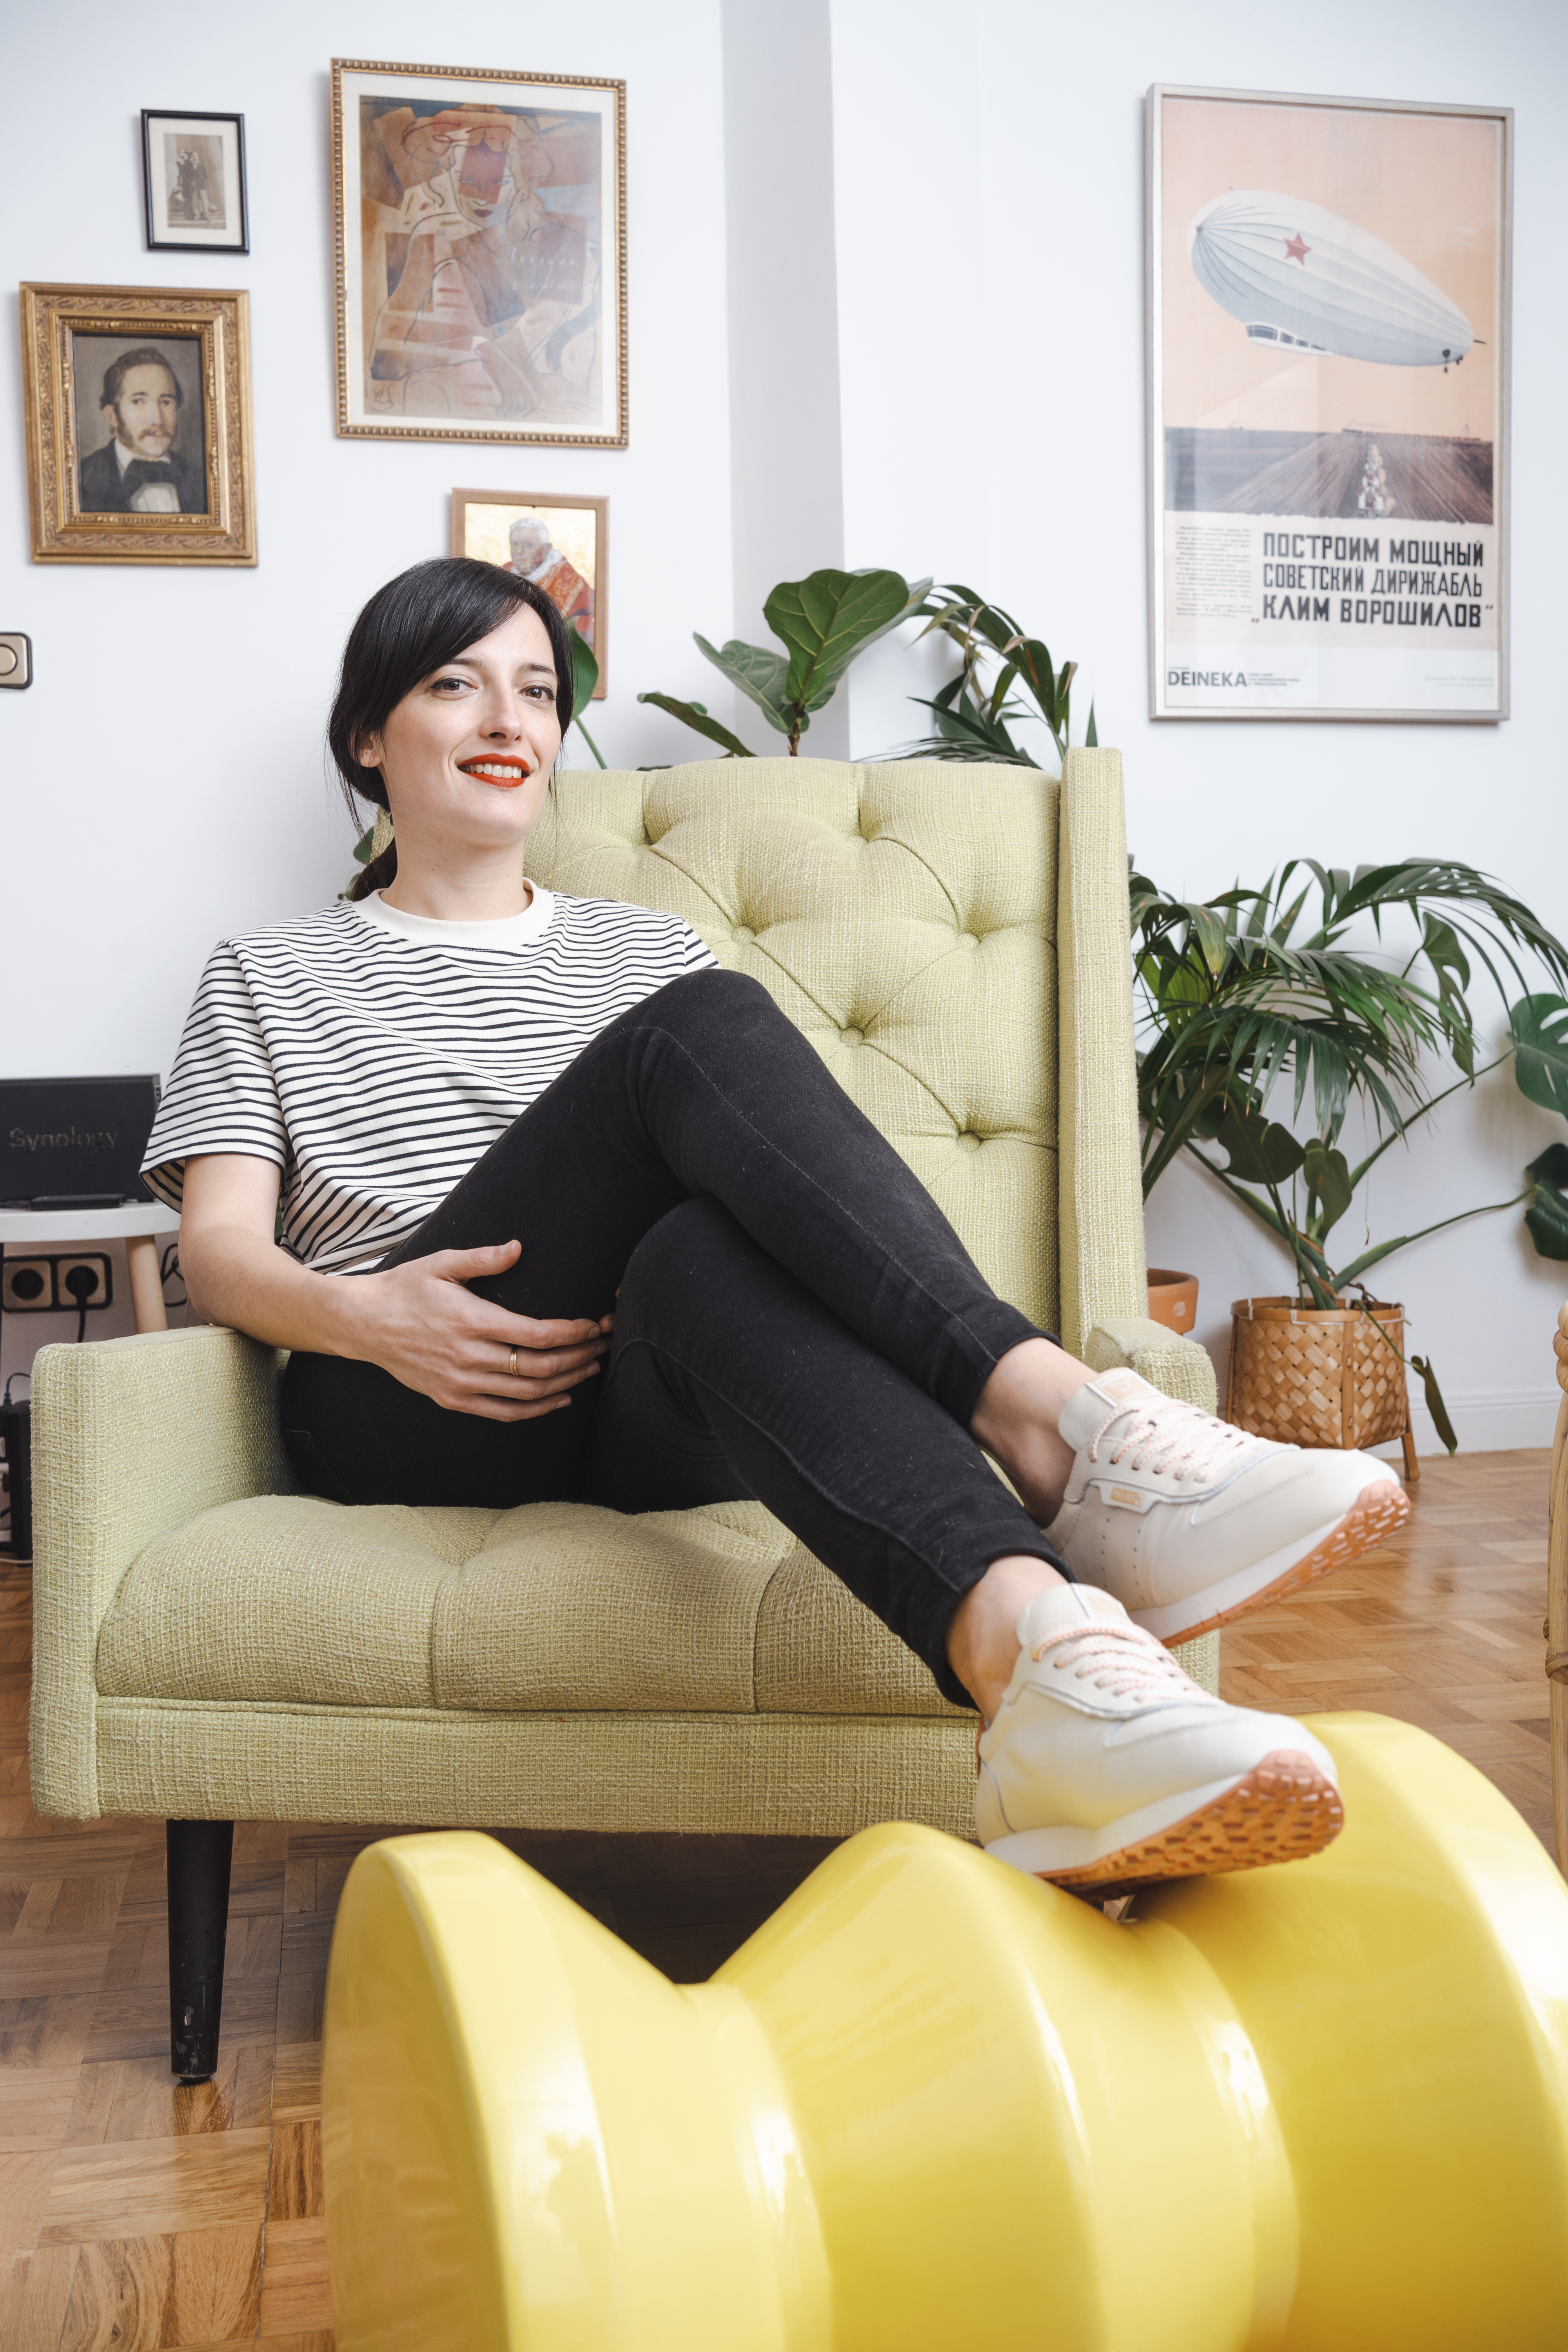 Lara Lars, sitting in an armchair with her legs crossed, supporting hers on a yellow sculpture. She shows her Pikolinos sneakers in white color and with an orange sole.